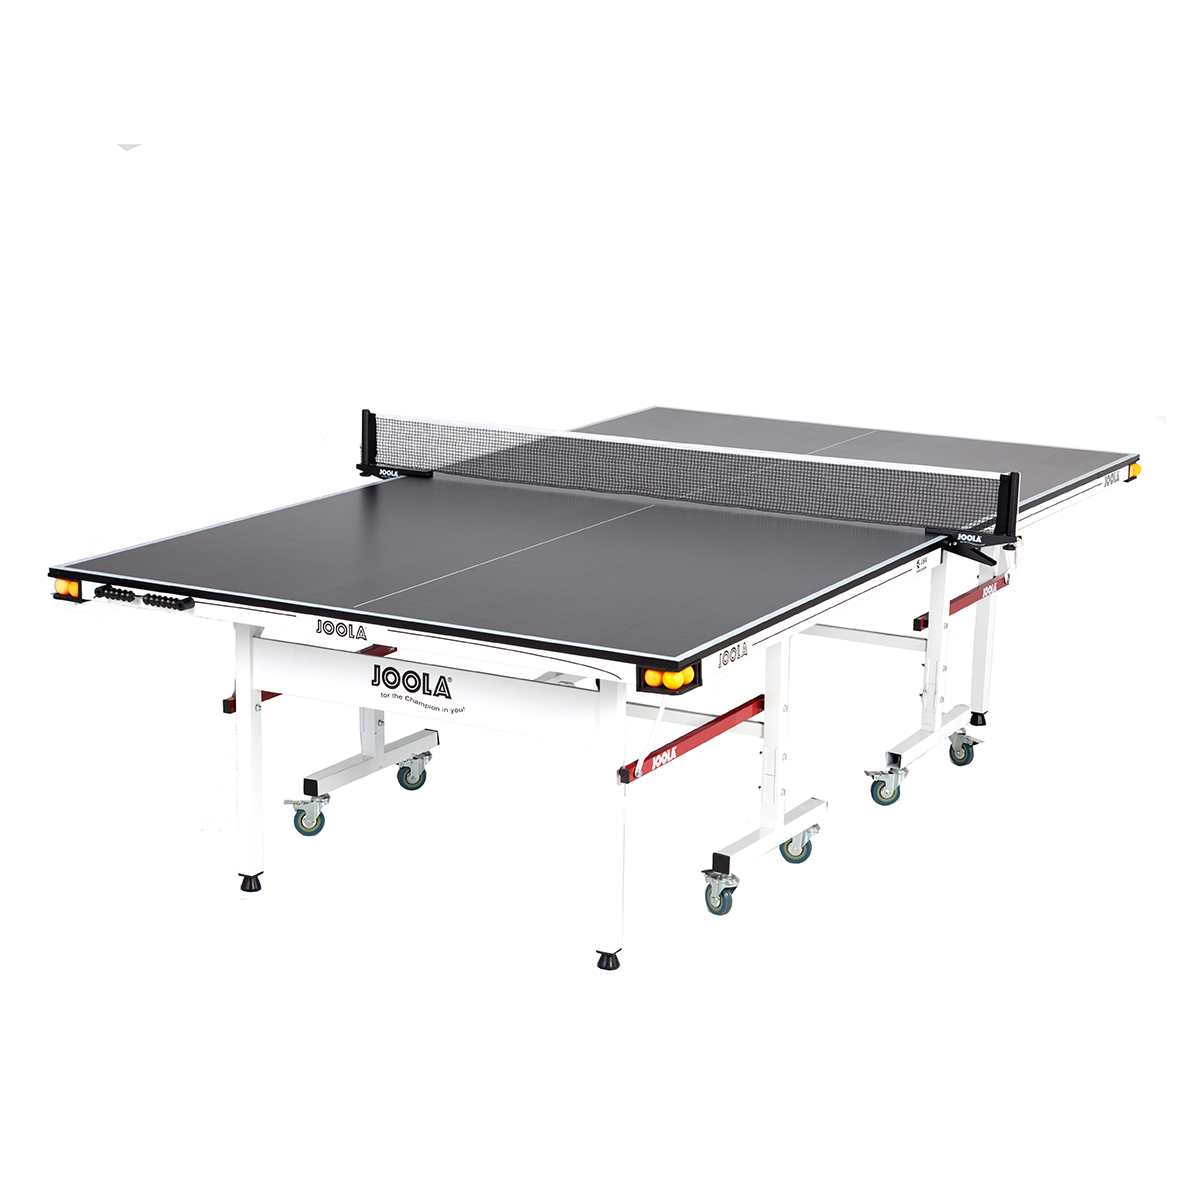 JOOLA RAPID PLAY 180 INDOOR TABLE TENNIS TABLE WITH NET SET (18MM THICK)